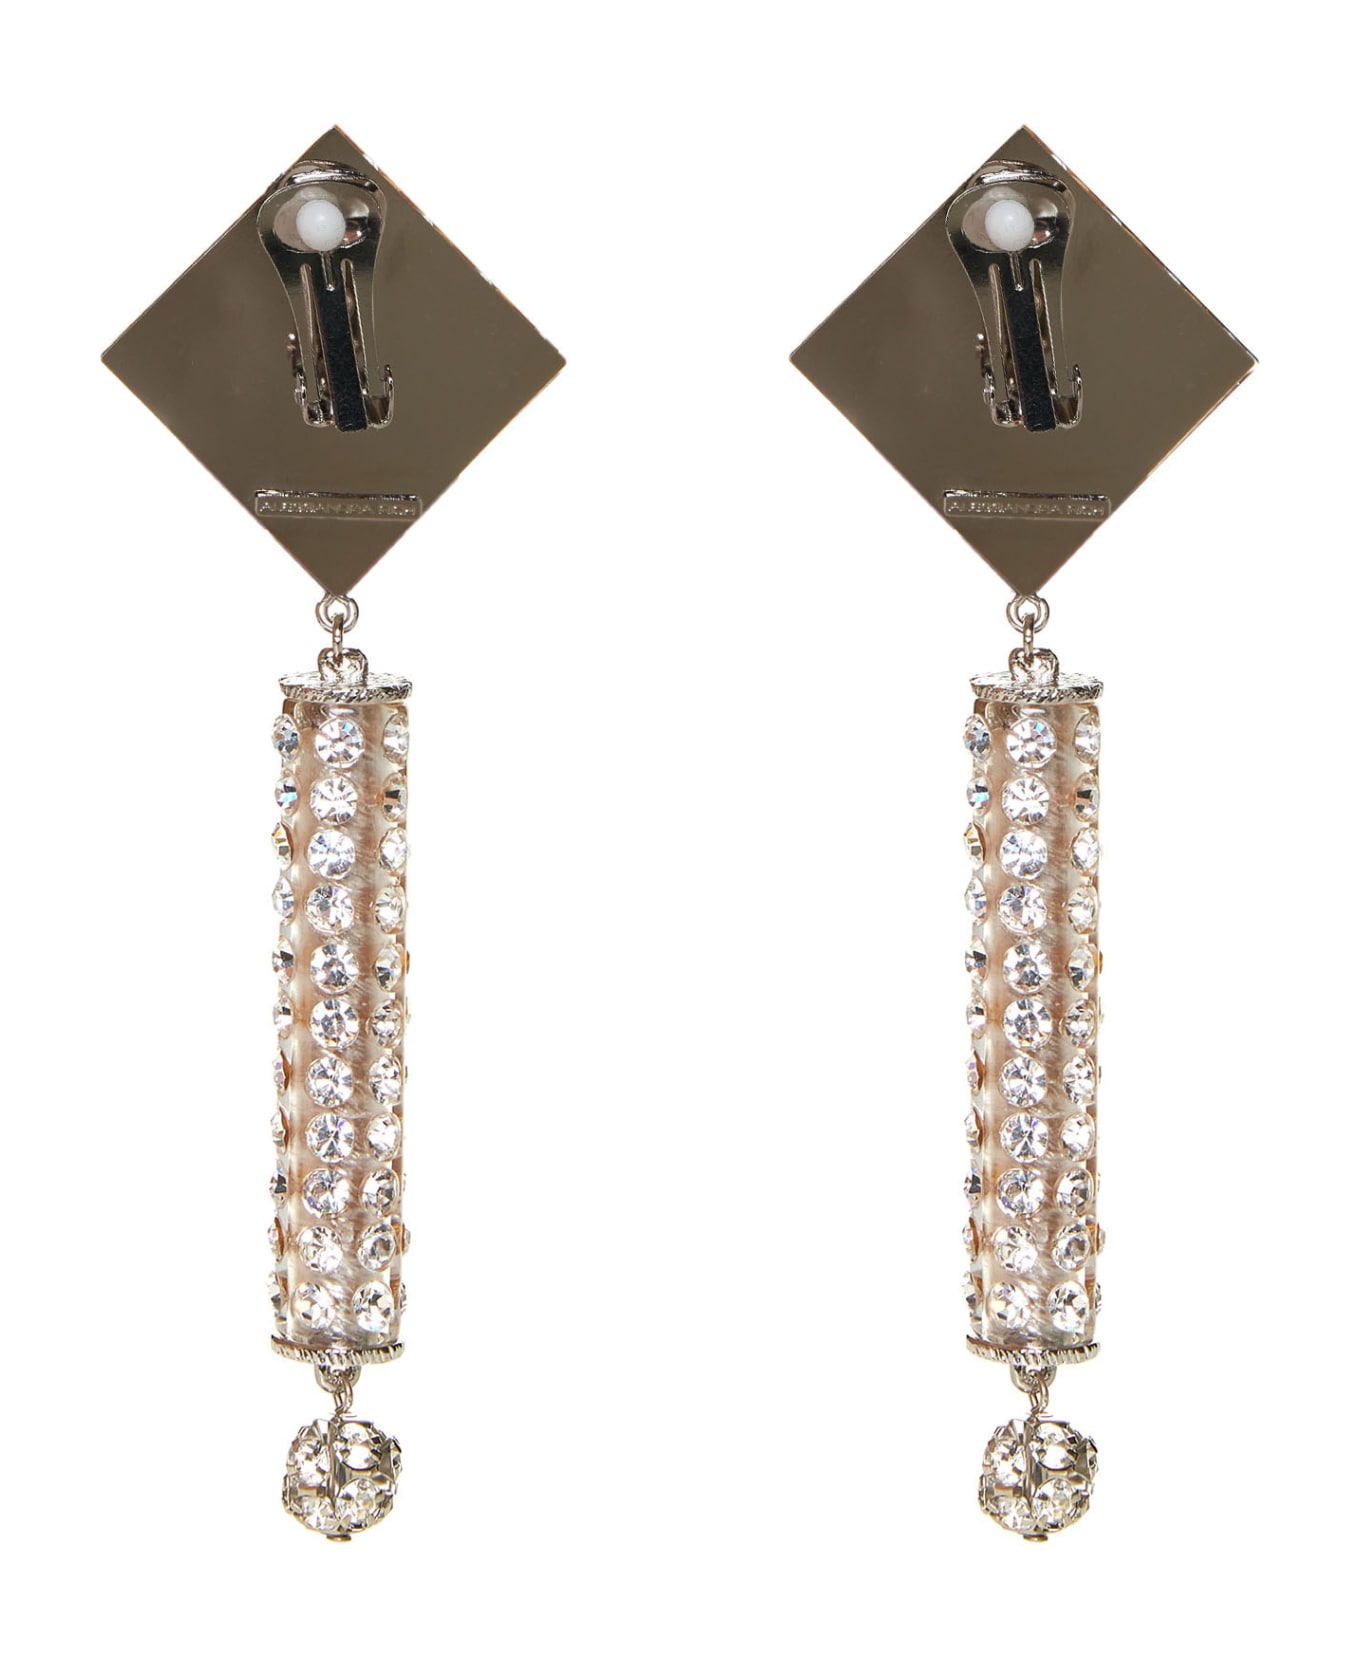 Alessandra Rich Crystal Earrings - Cry silver